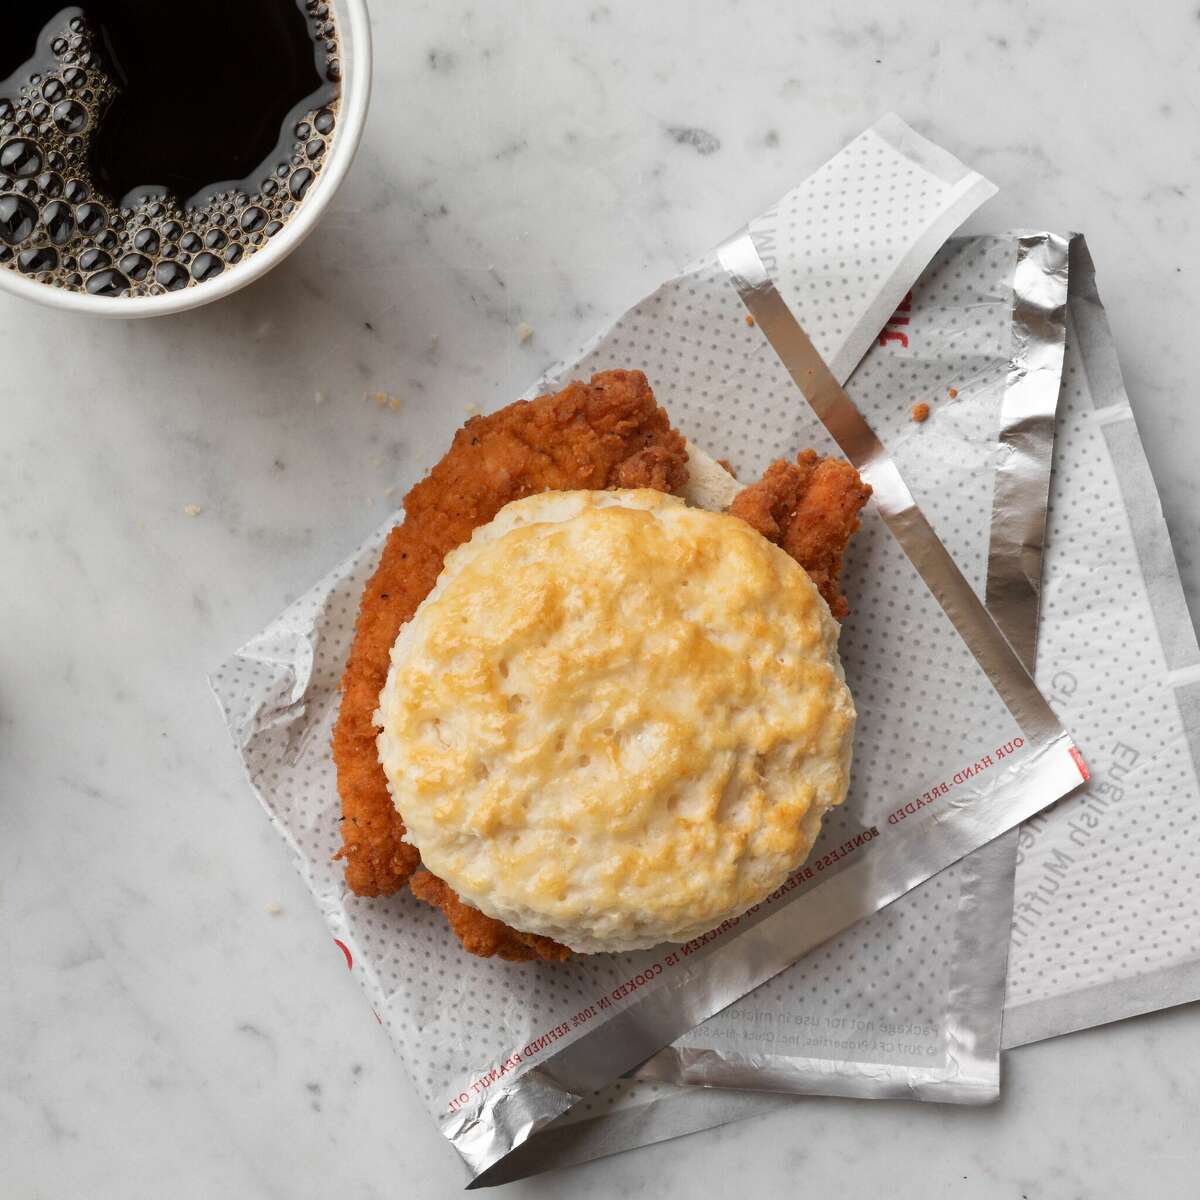 The spicy chicken biscuit returns to Chick-fil-A.